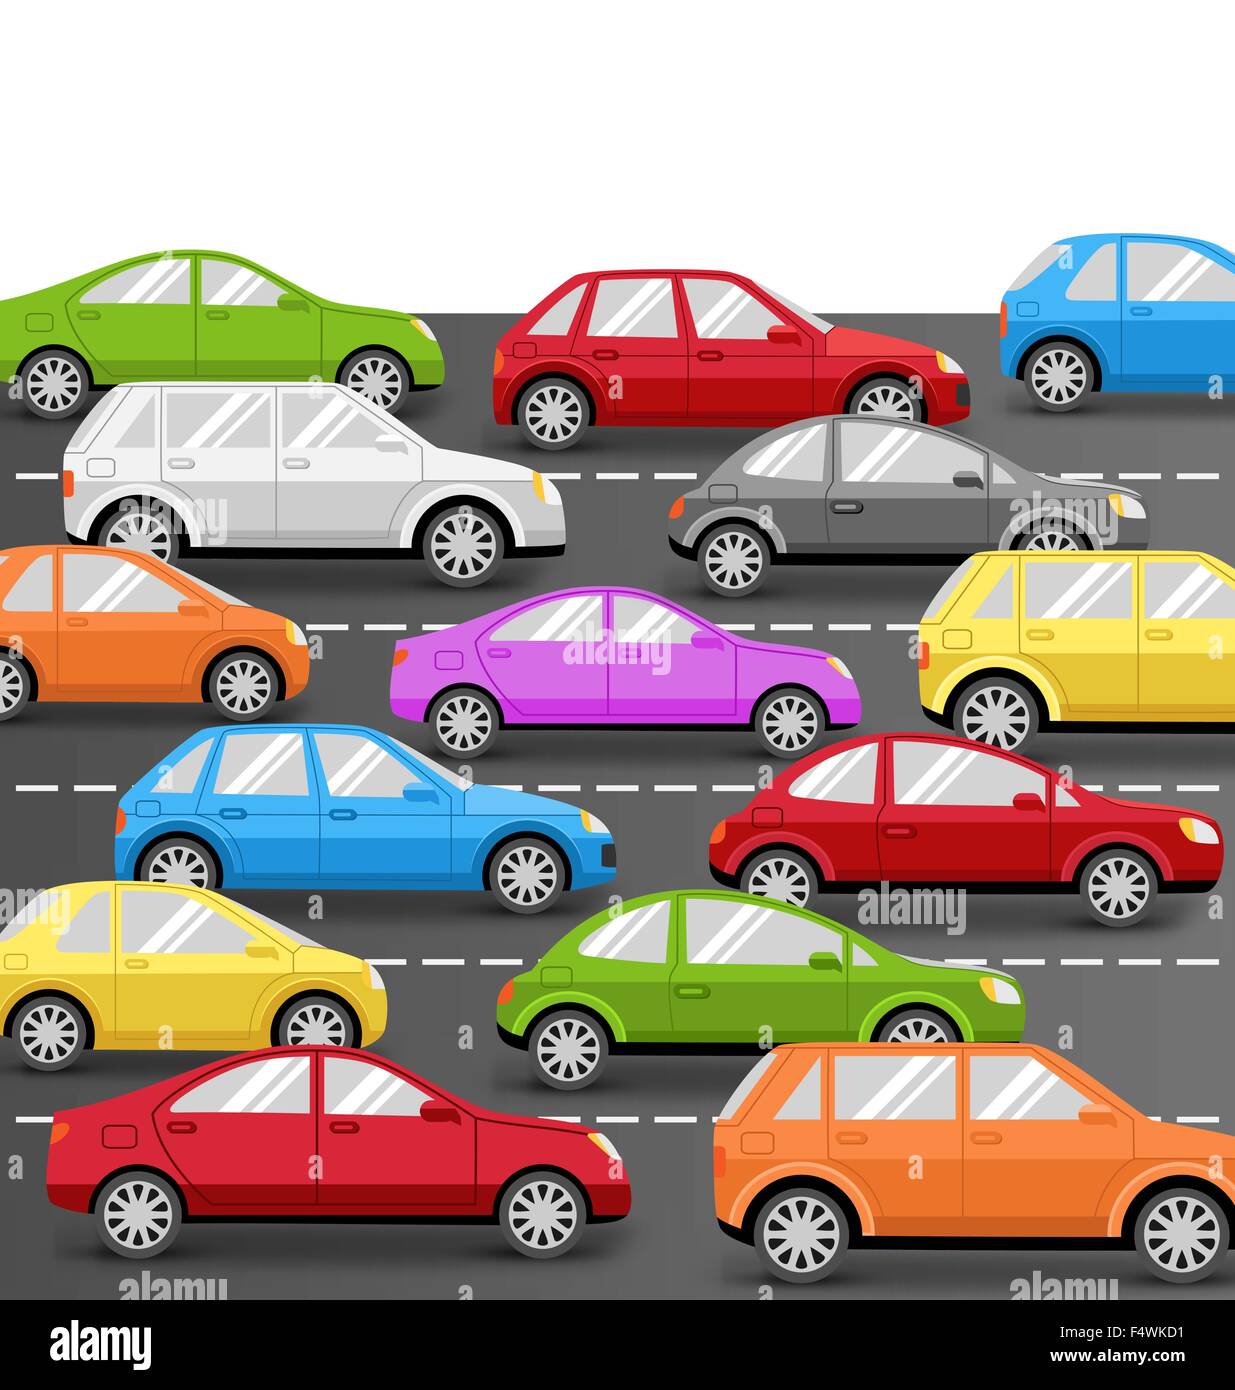 Cars on Road. Transport Background Stock Vector